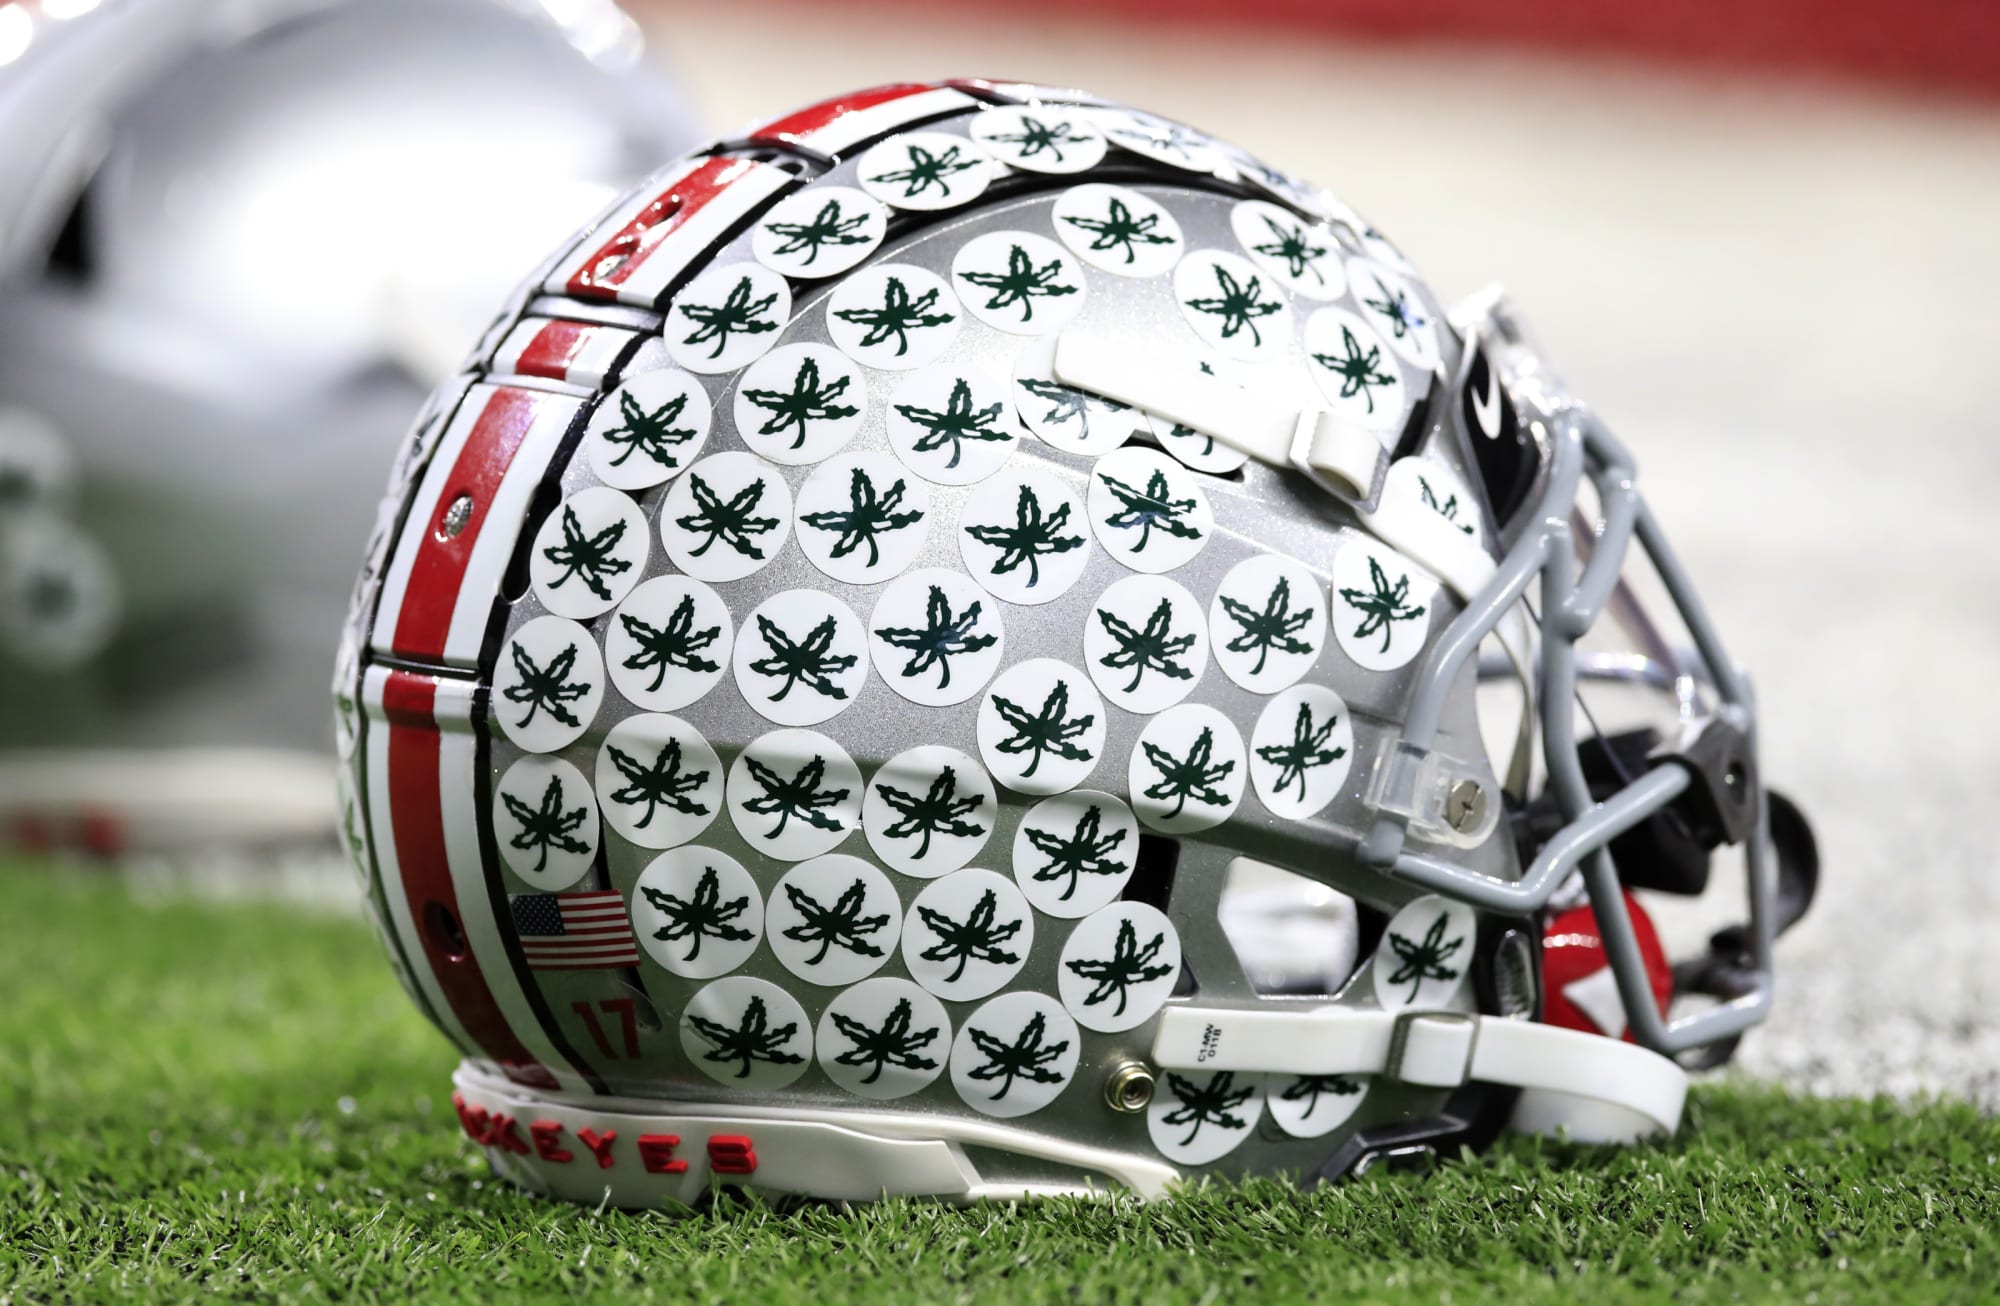 Former Ohio State player, message board poster sued by university